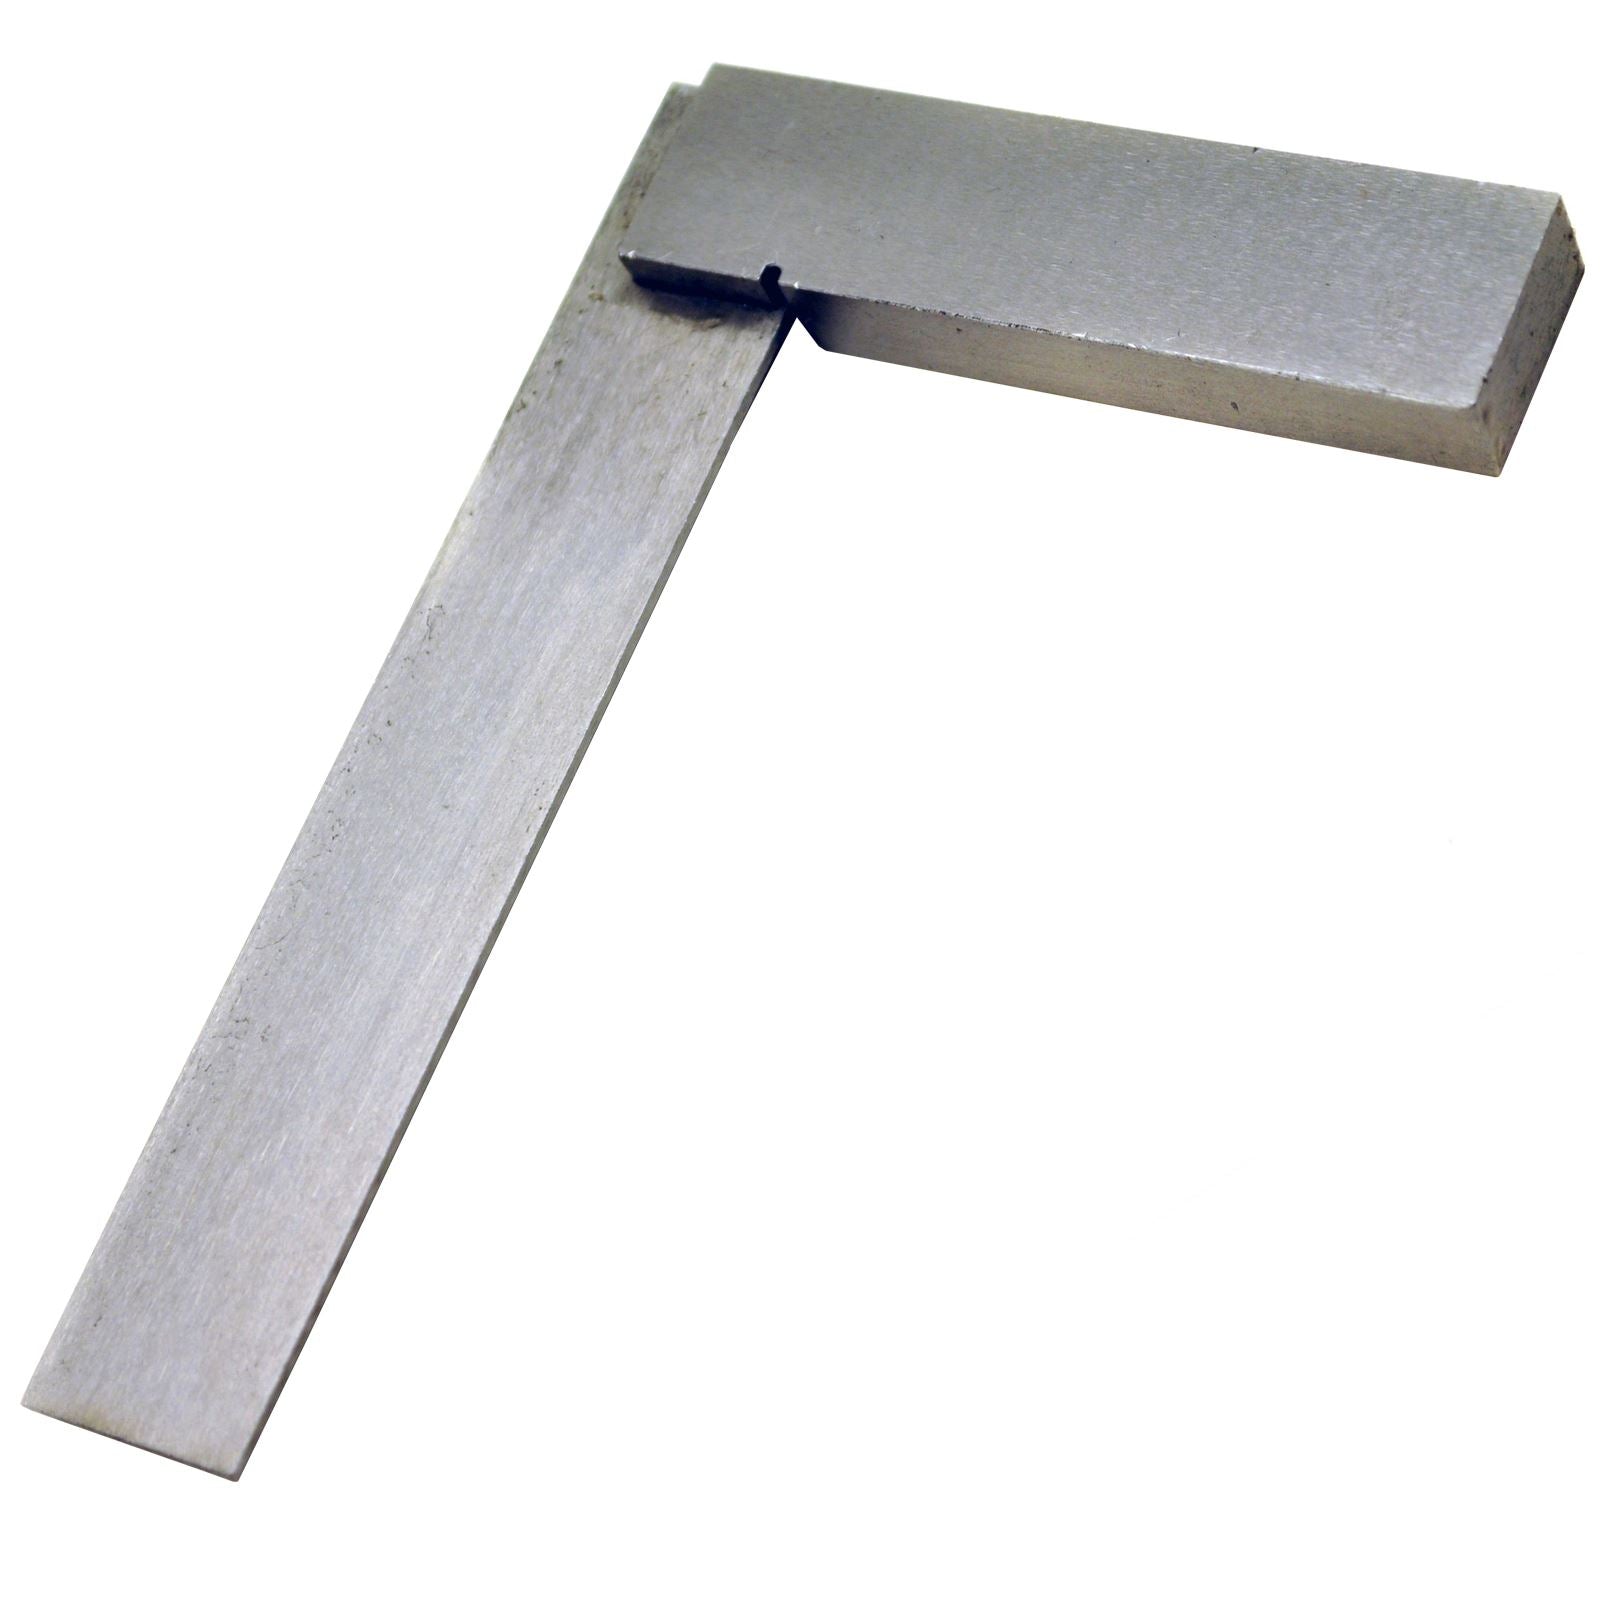 4" (100mm) Engineers Square / Set Square / Right Angle / Straight Edge TE423